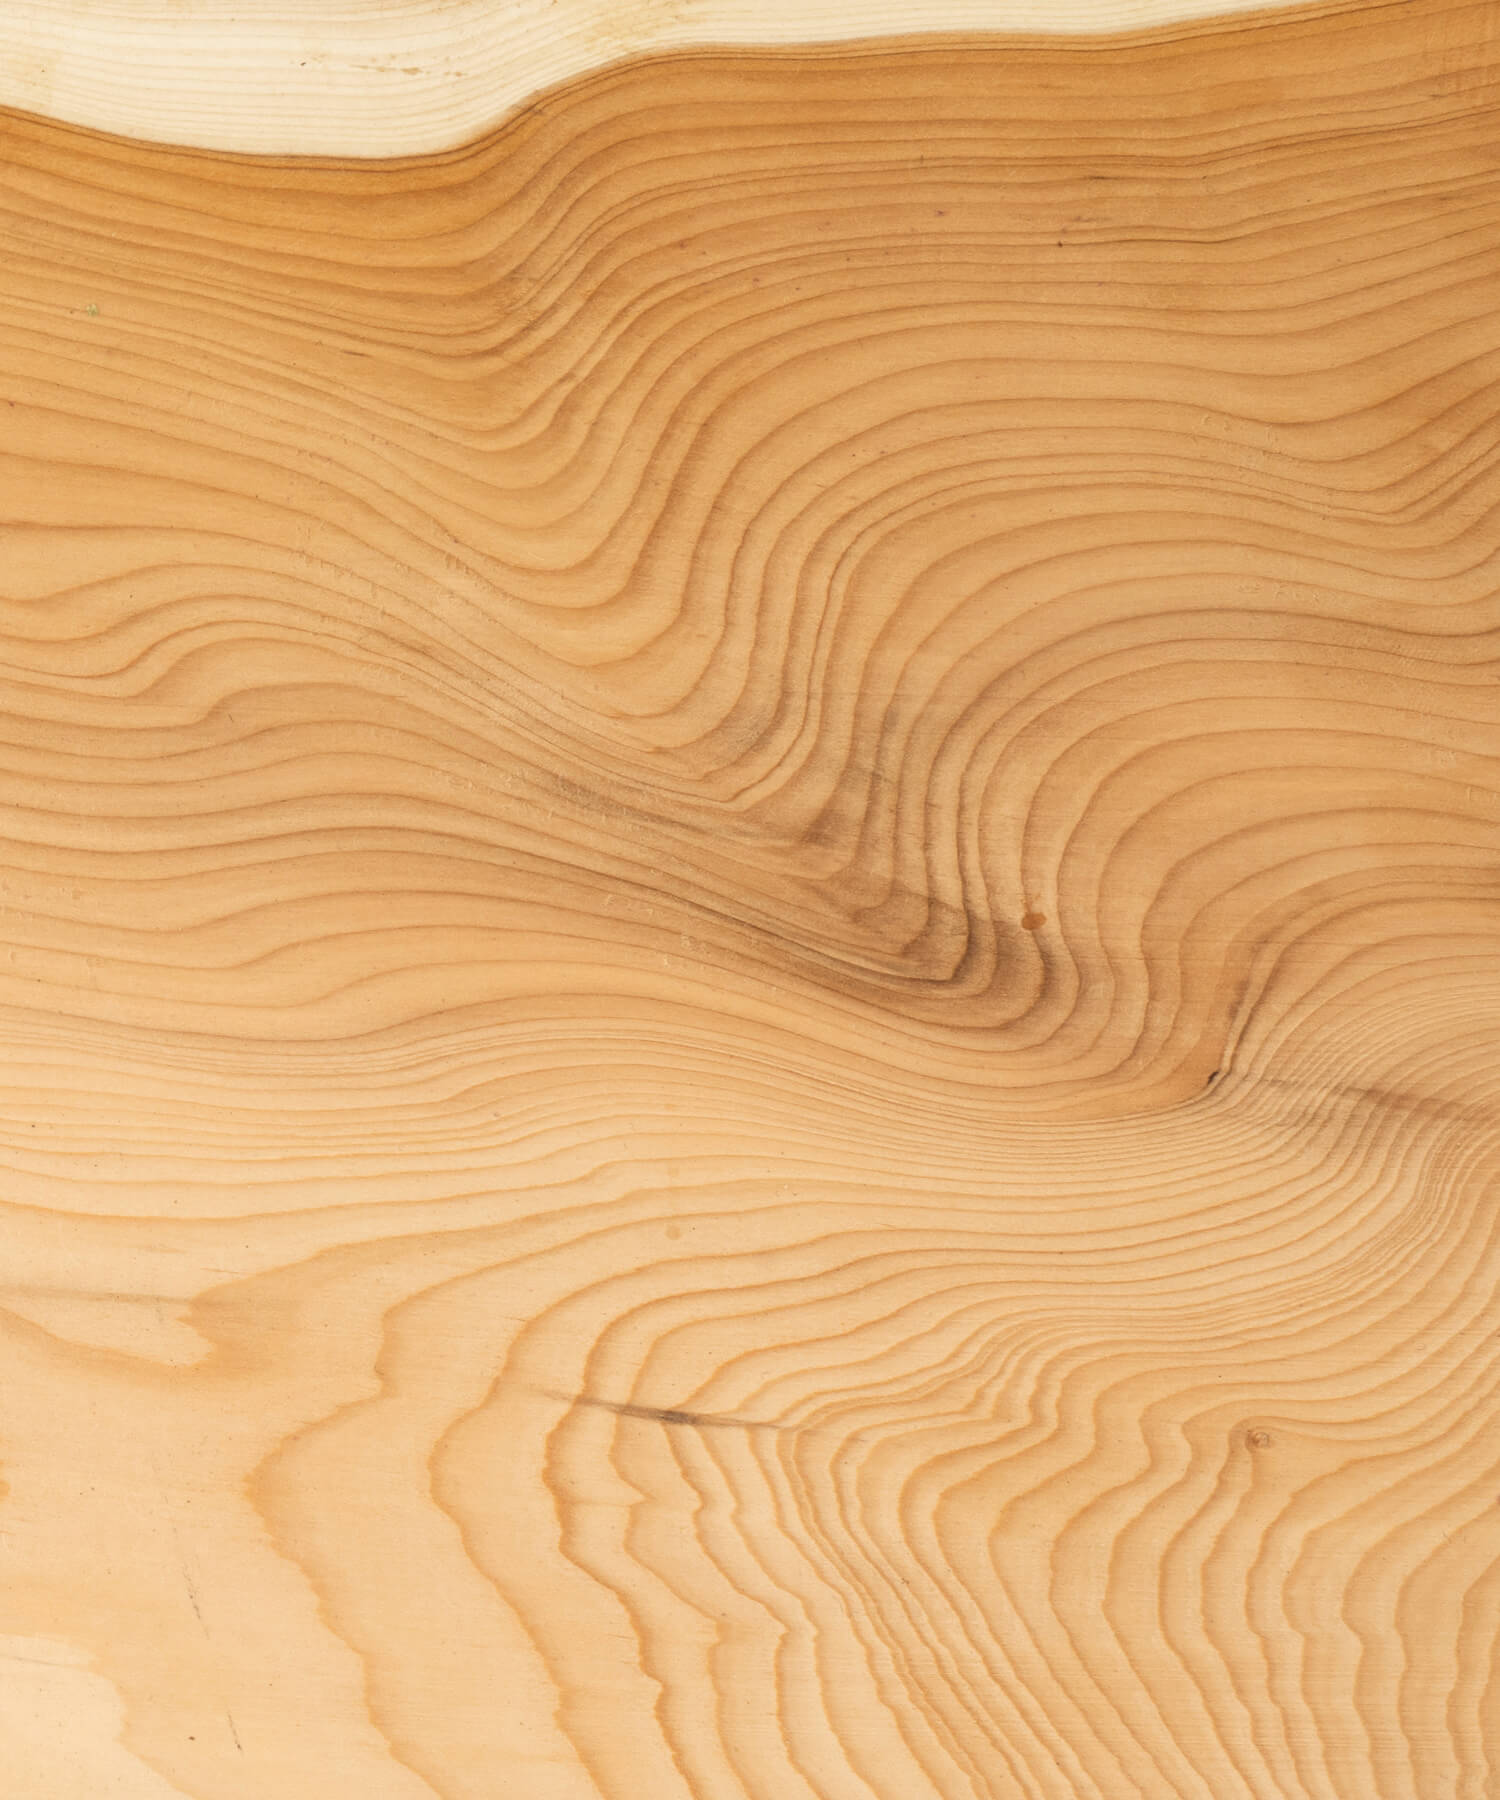 unoiled yew timber grain close up